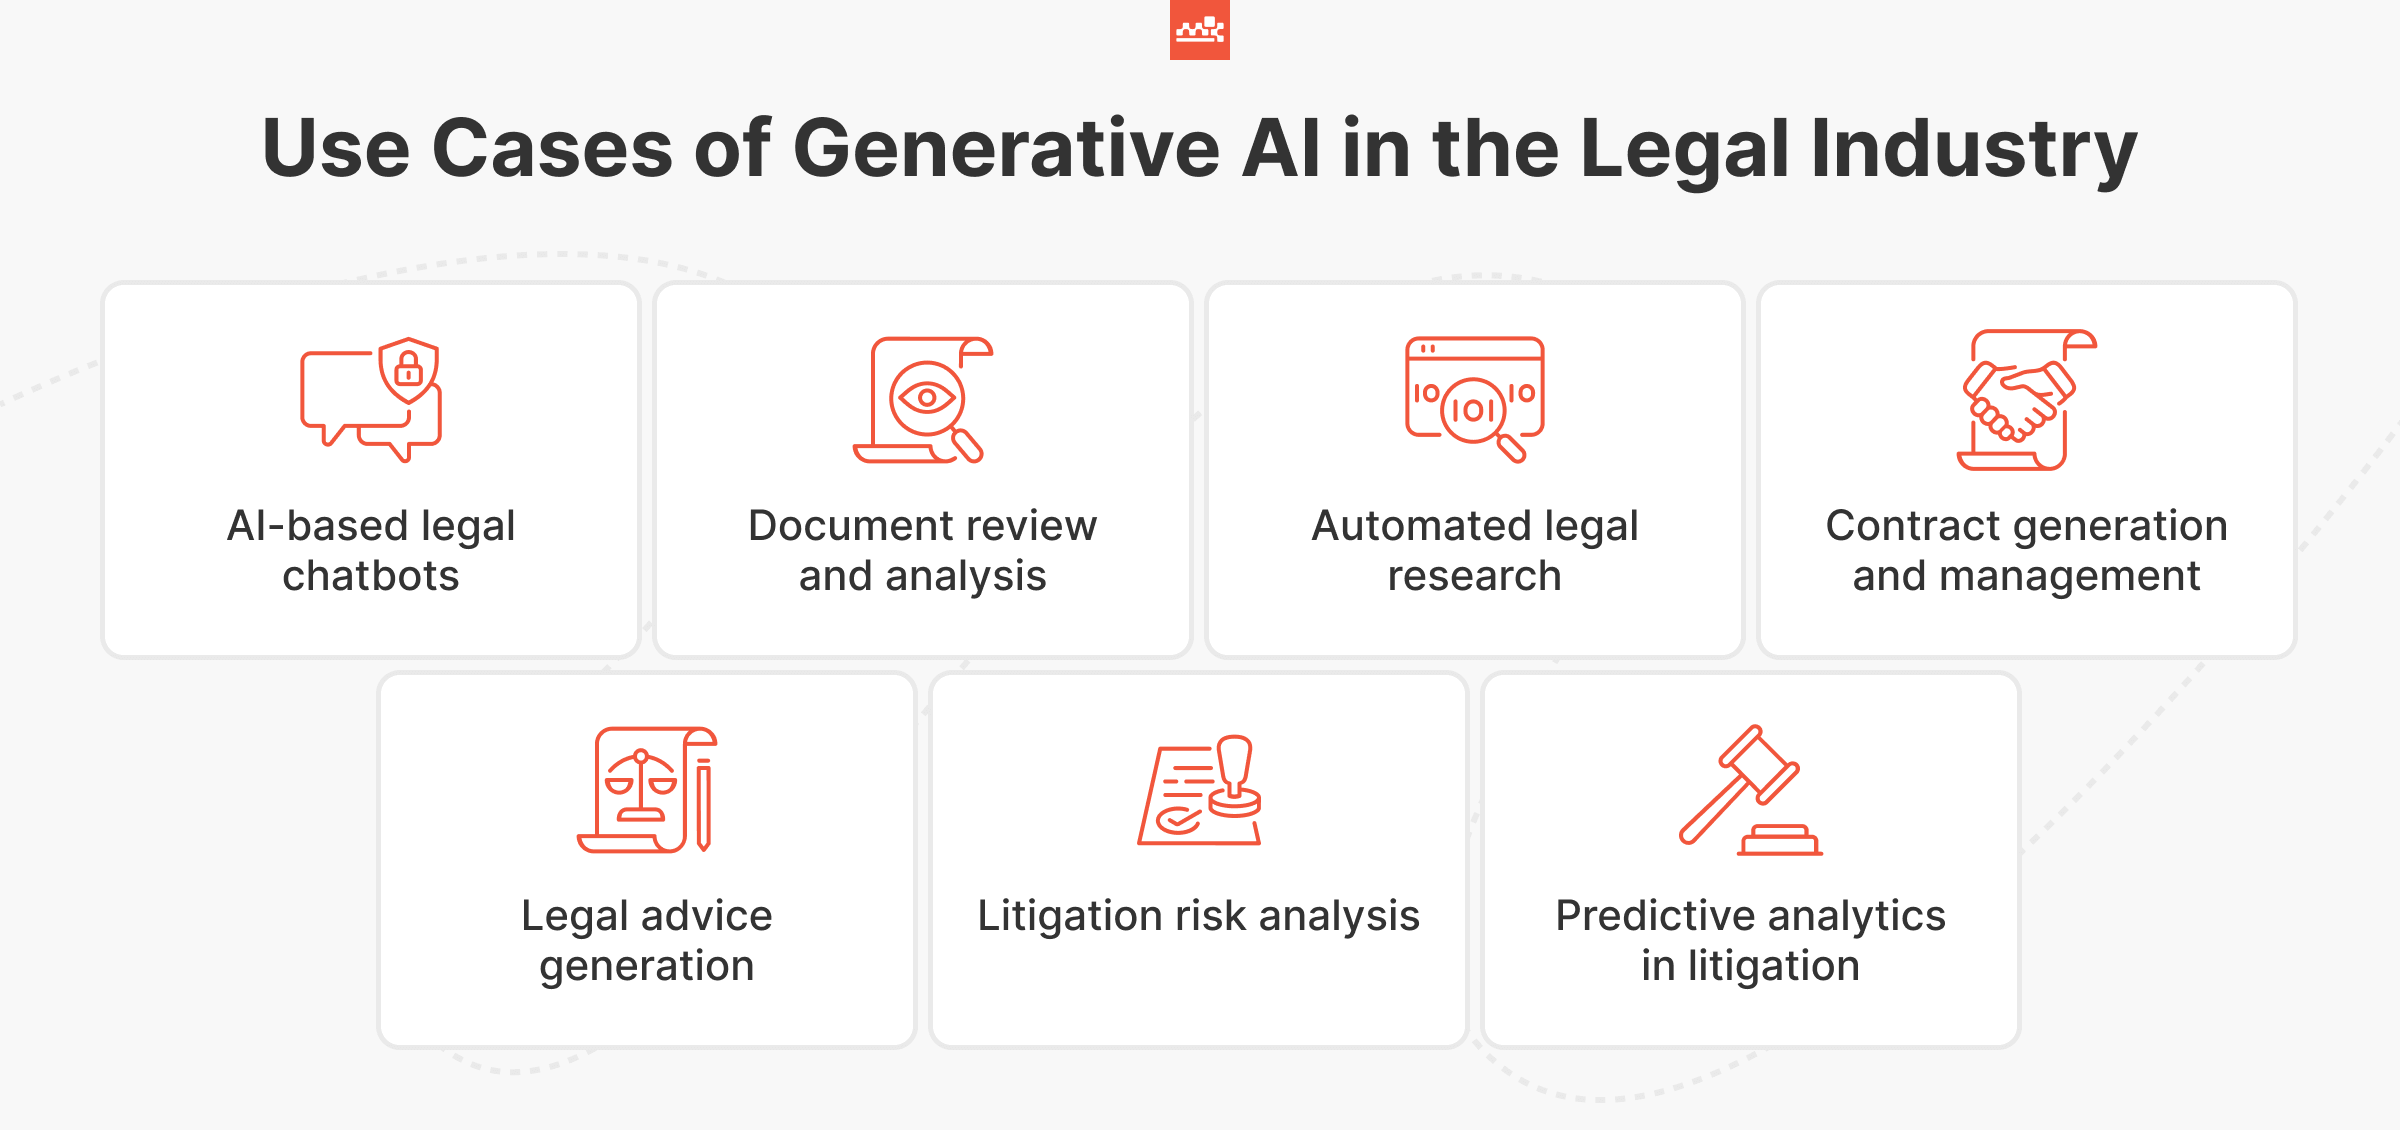 Generative AI Use Cases in the Legal Industry